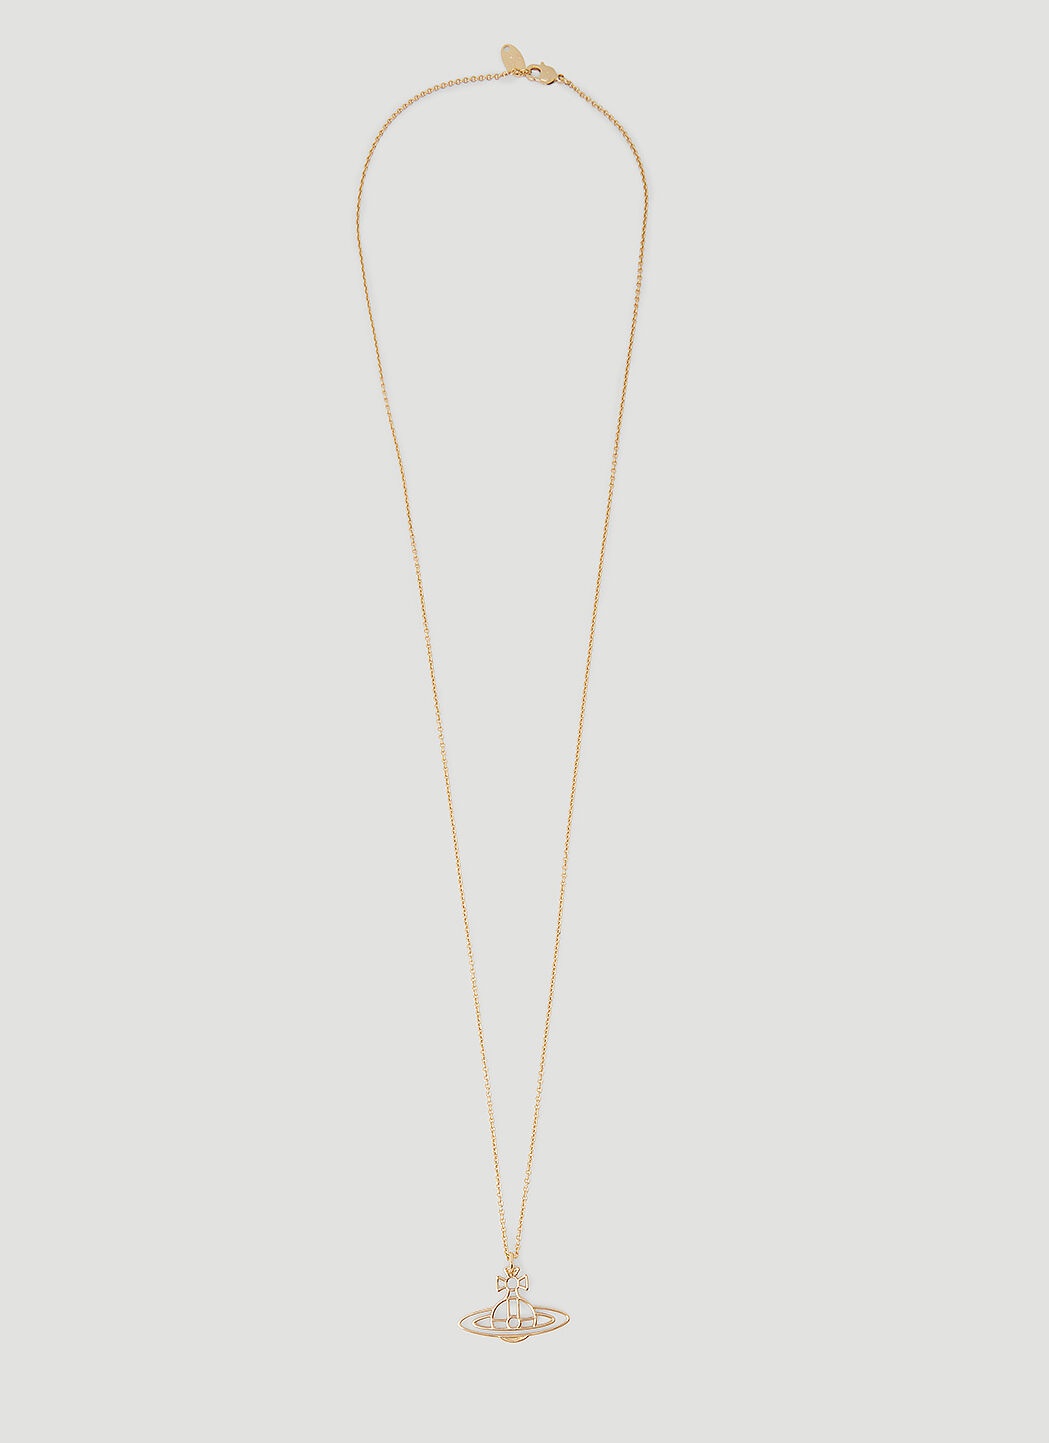 Vivienne Westwood Thin Lines Flat Orb Necklace | REVERSIBLE